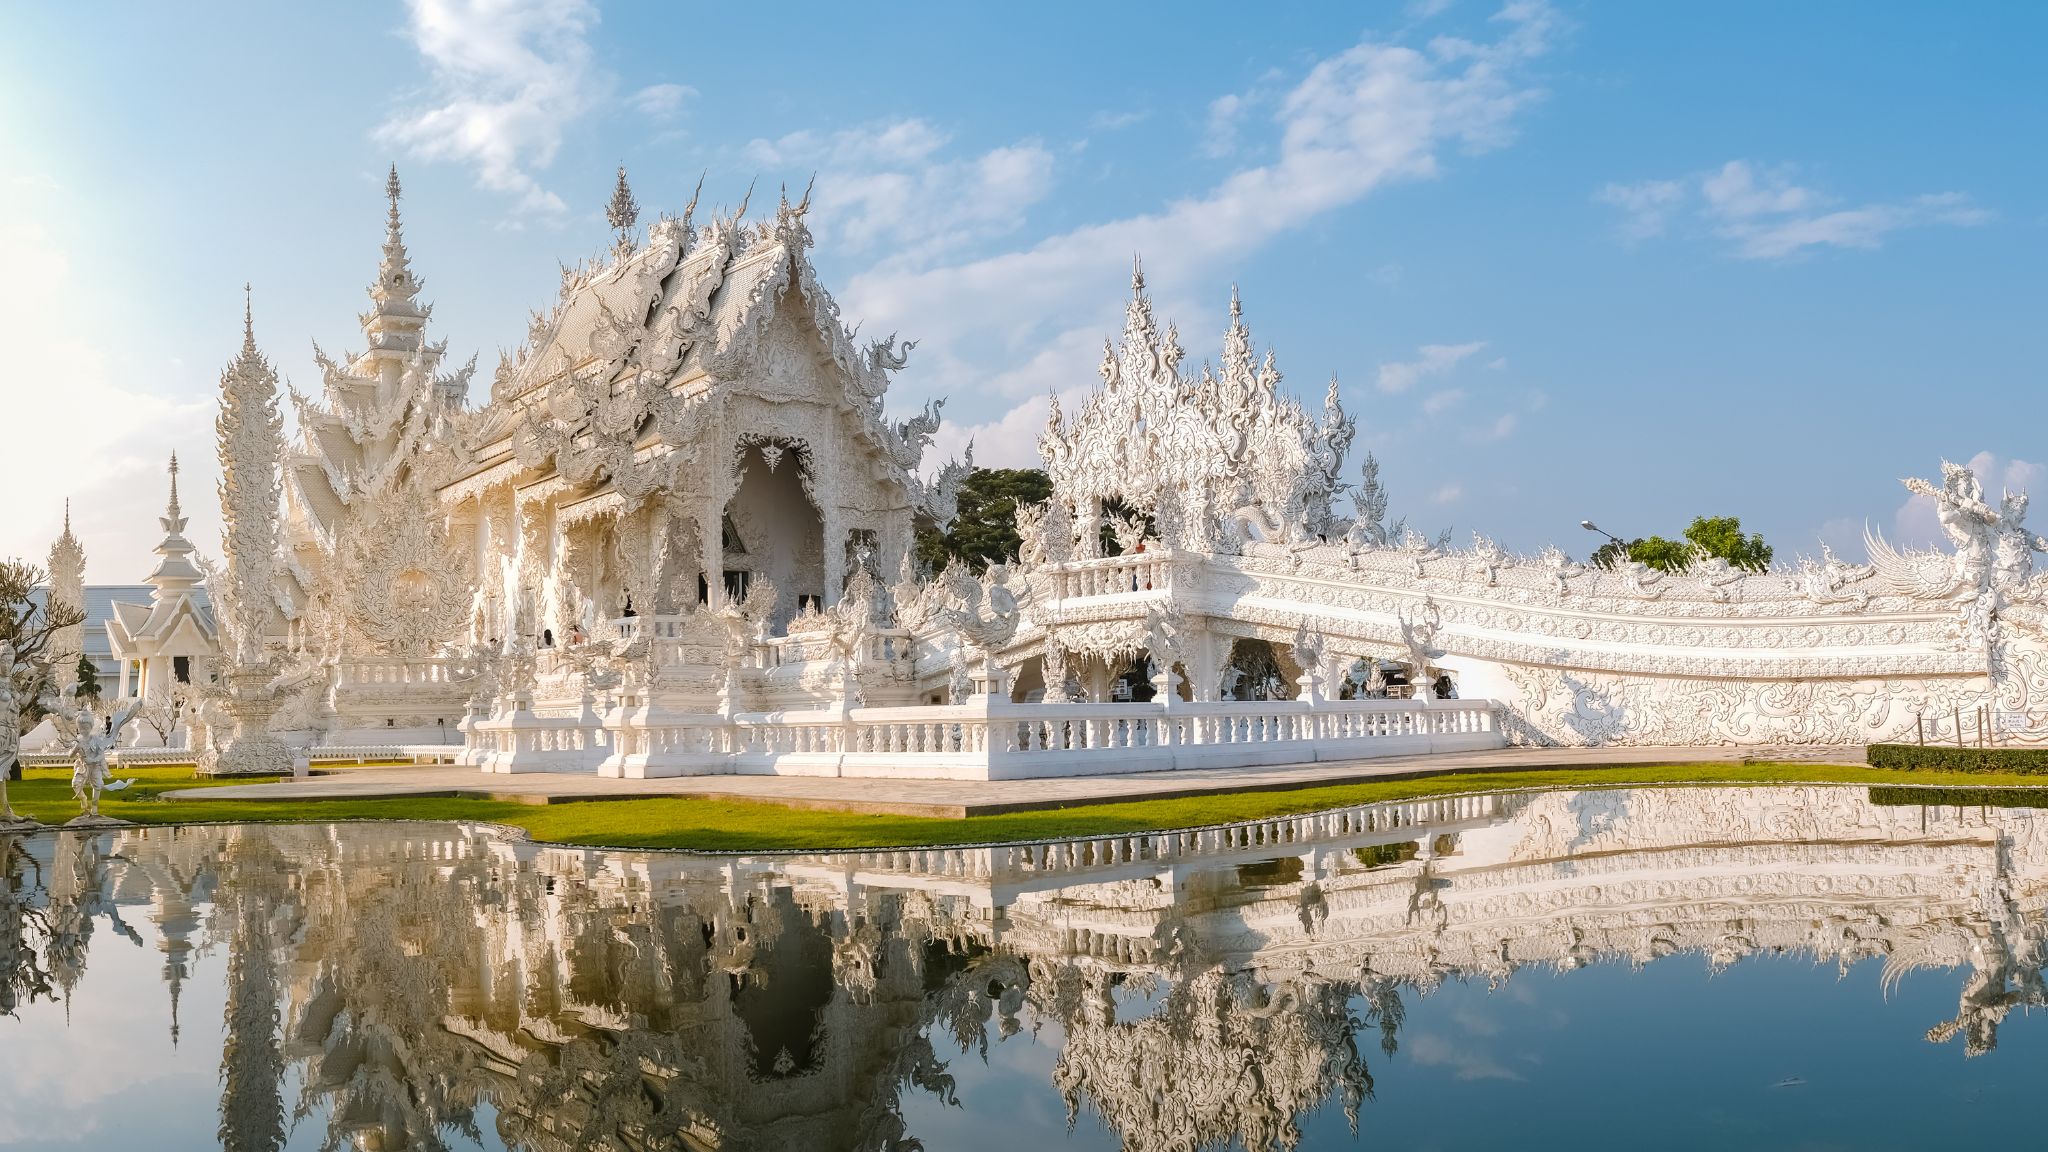 Day 7 Discover The Stunning Architecture Of Wat Rong Khun